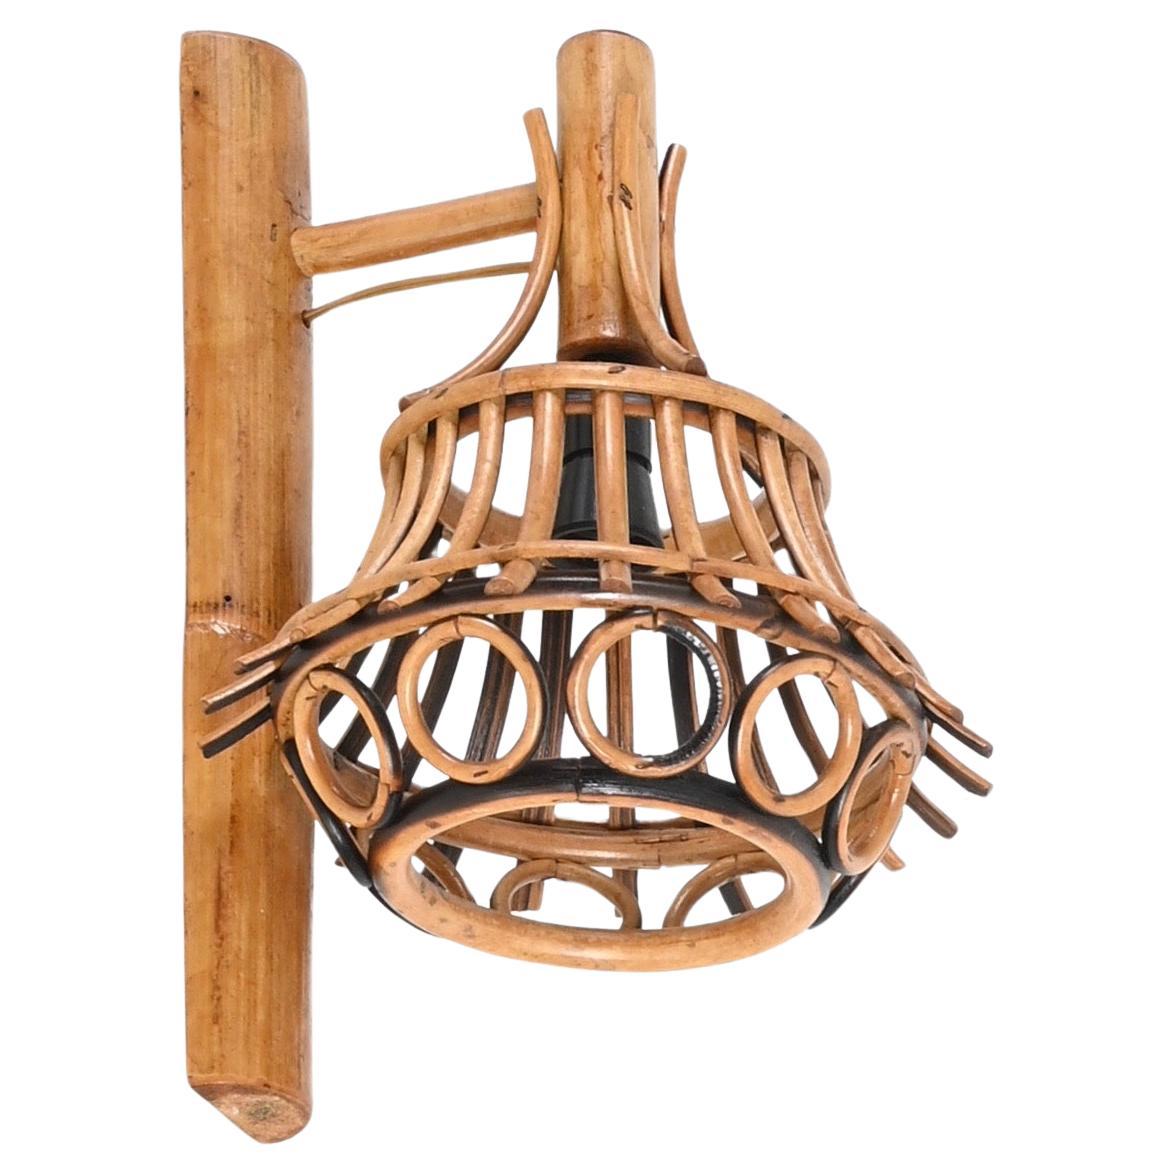 Midcentury Rattan and Bamboo "Lantern" Sconce, Louis Sognot, France, 1960s